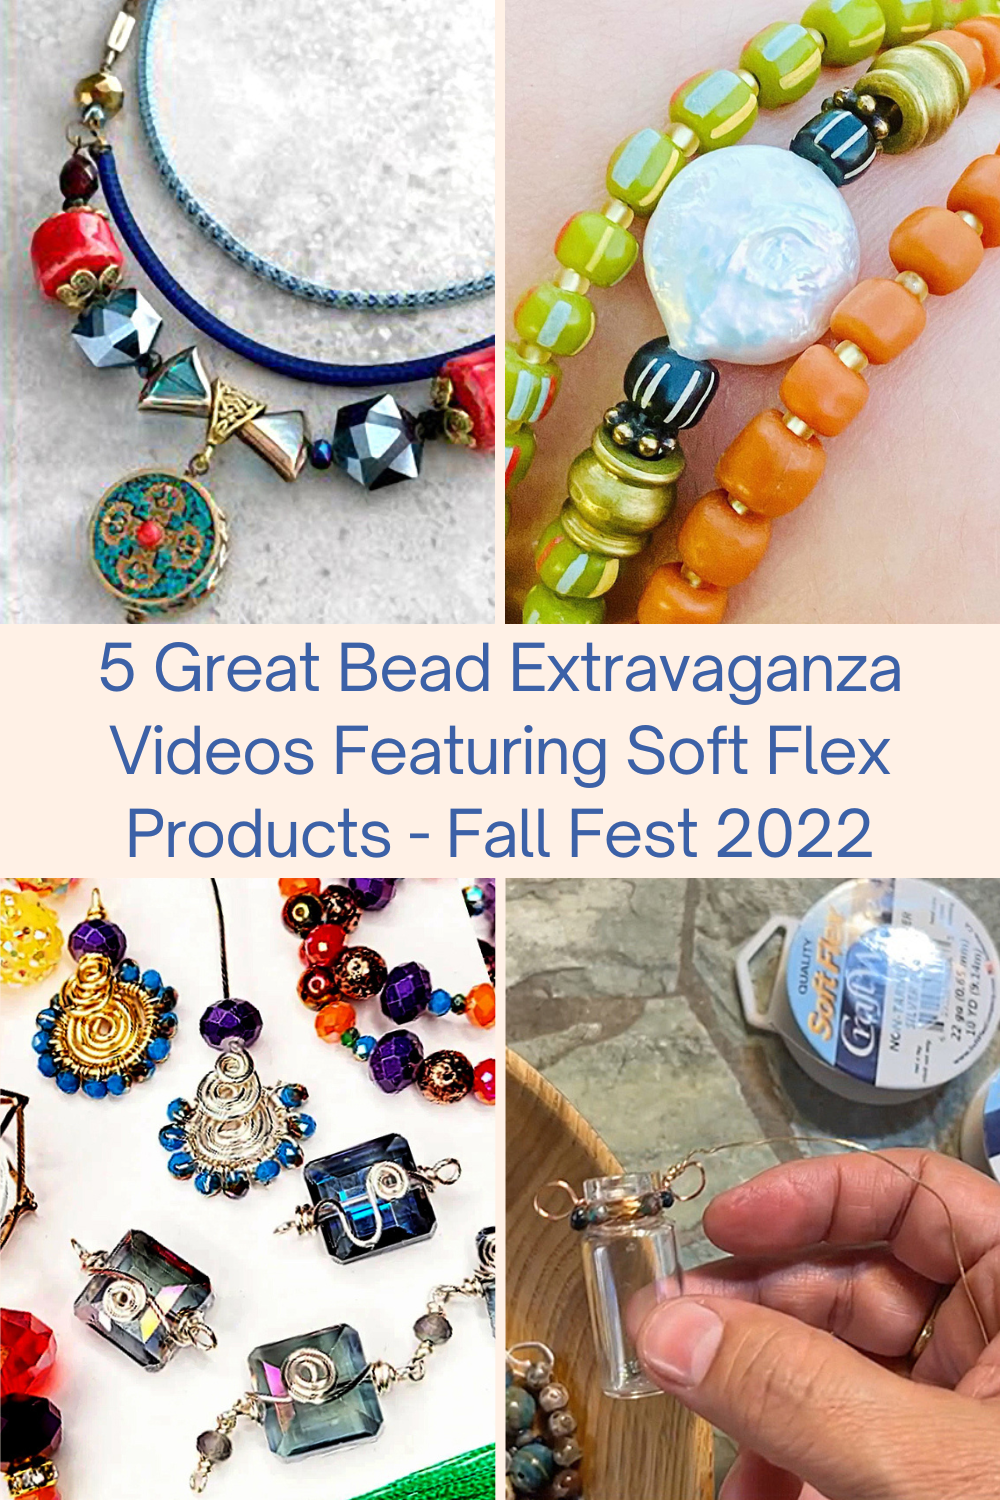 5 Great Bead Extravaganza Videos Featuring Soft Flex Products - Fall Fest 2022 Collage